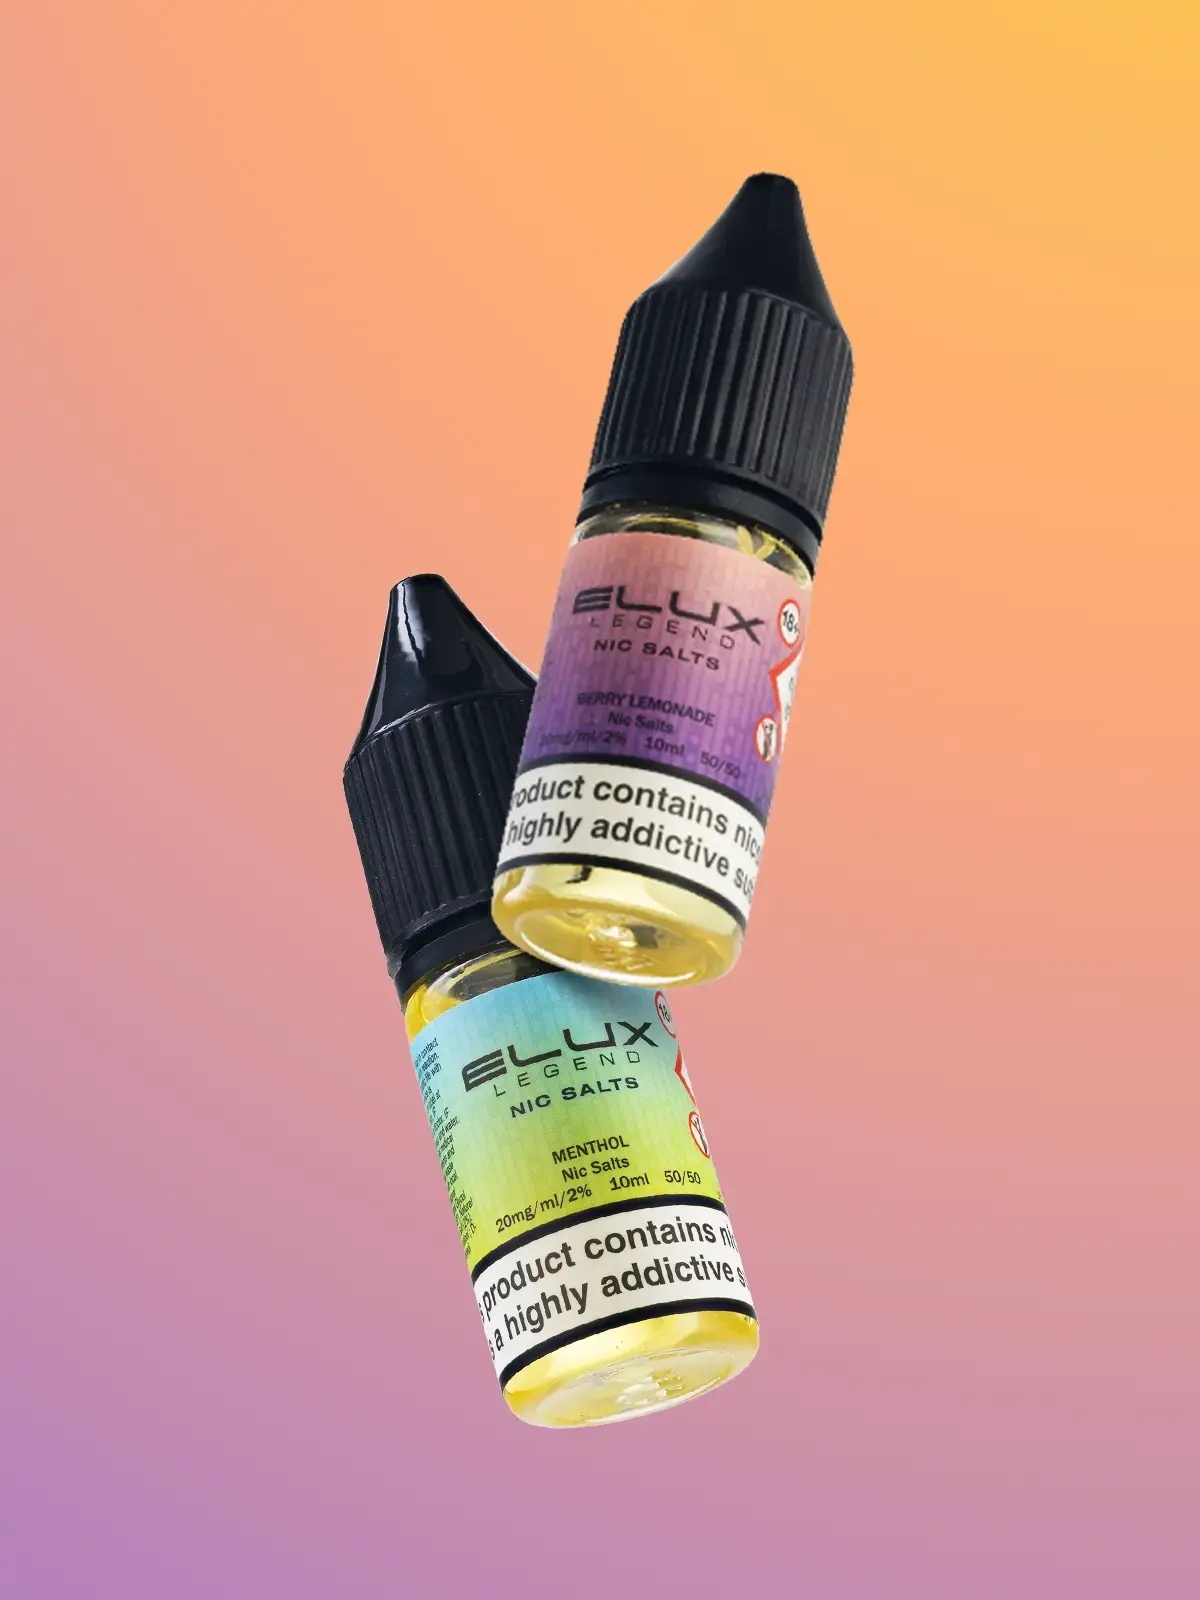 Two bottles of ELUX E-liquid; Berry Lemonade and Menthol nic salts, floating in front of a purple and orange background